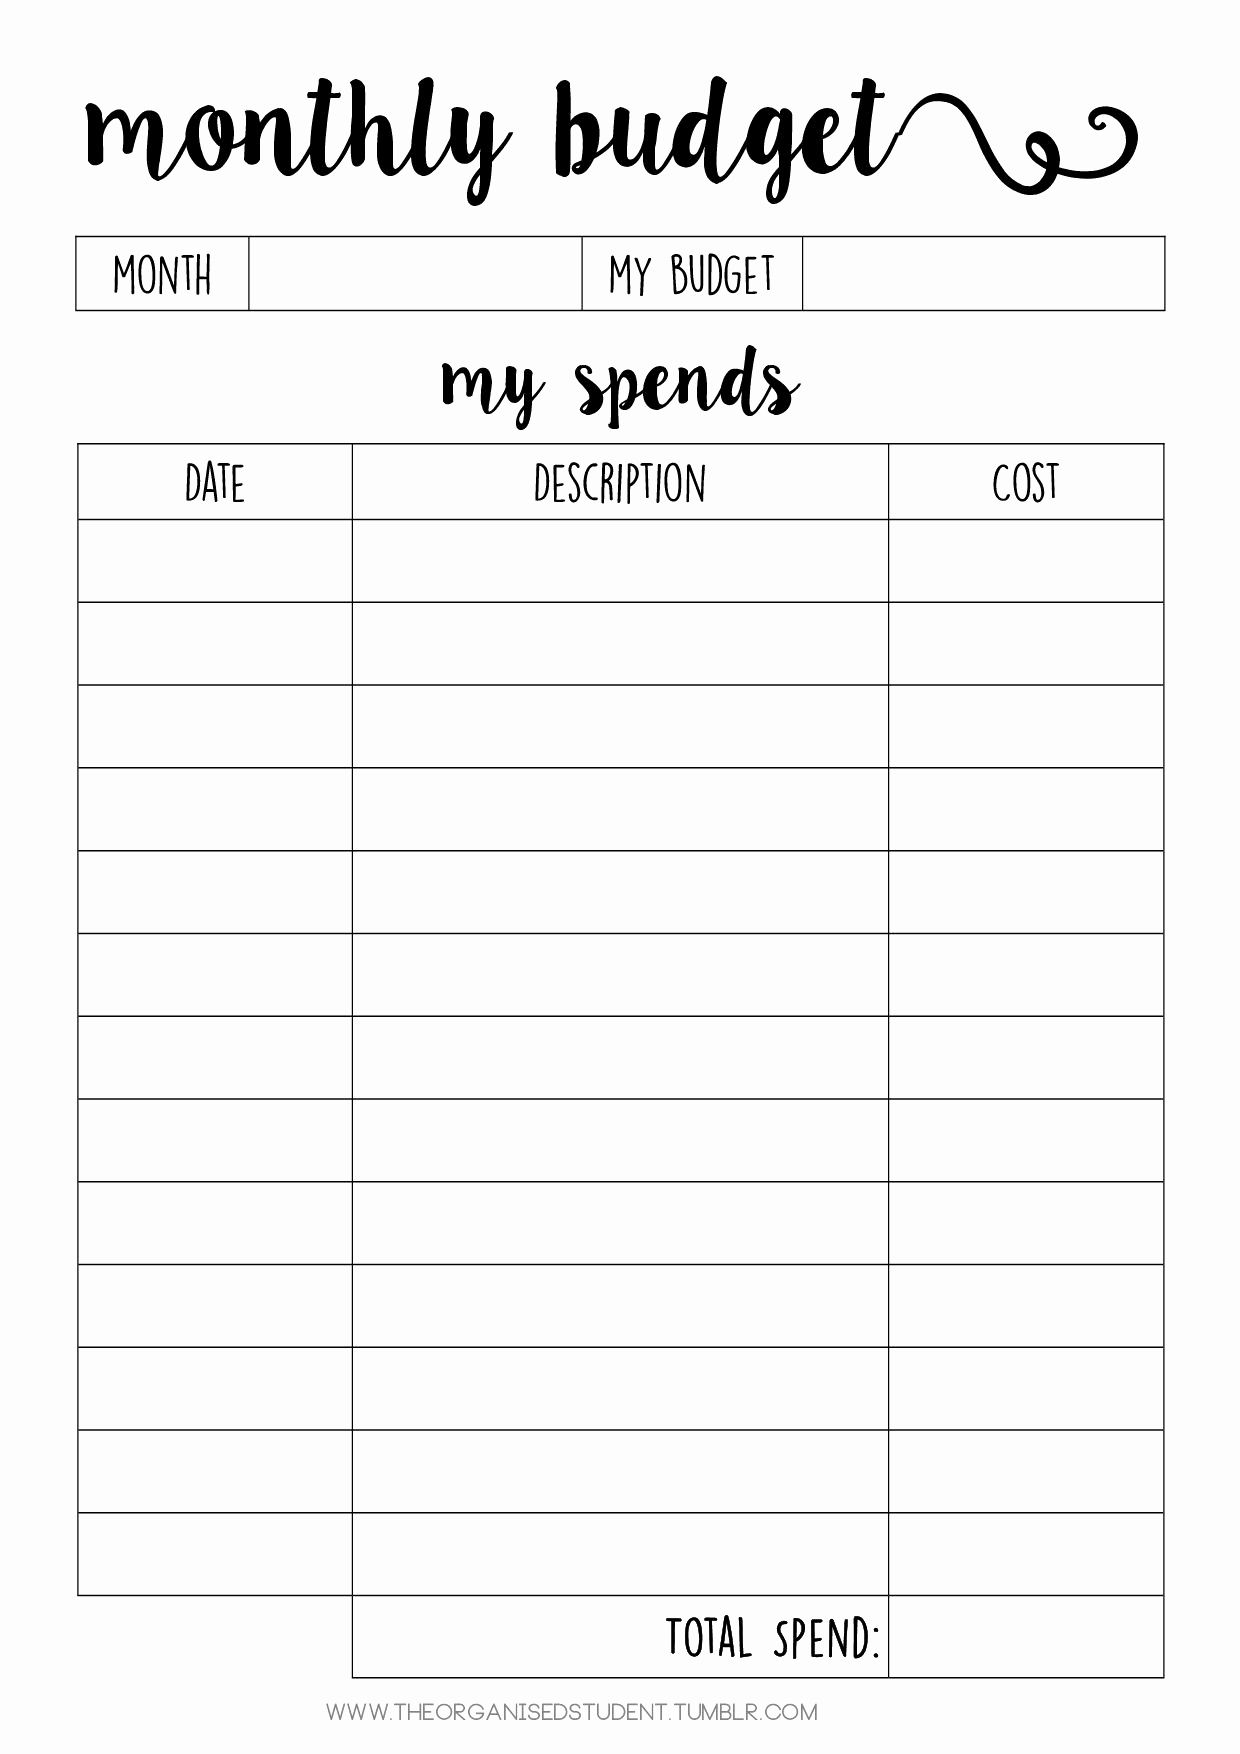 Extreme Couponing Spreadsheet Template Best Of Coupon Spreadsheet Within Coupon Spreadsheet App